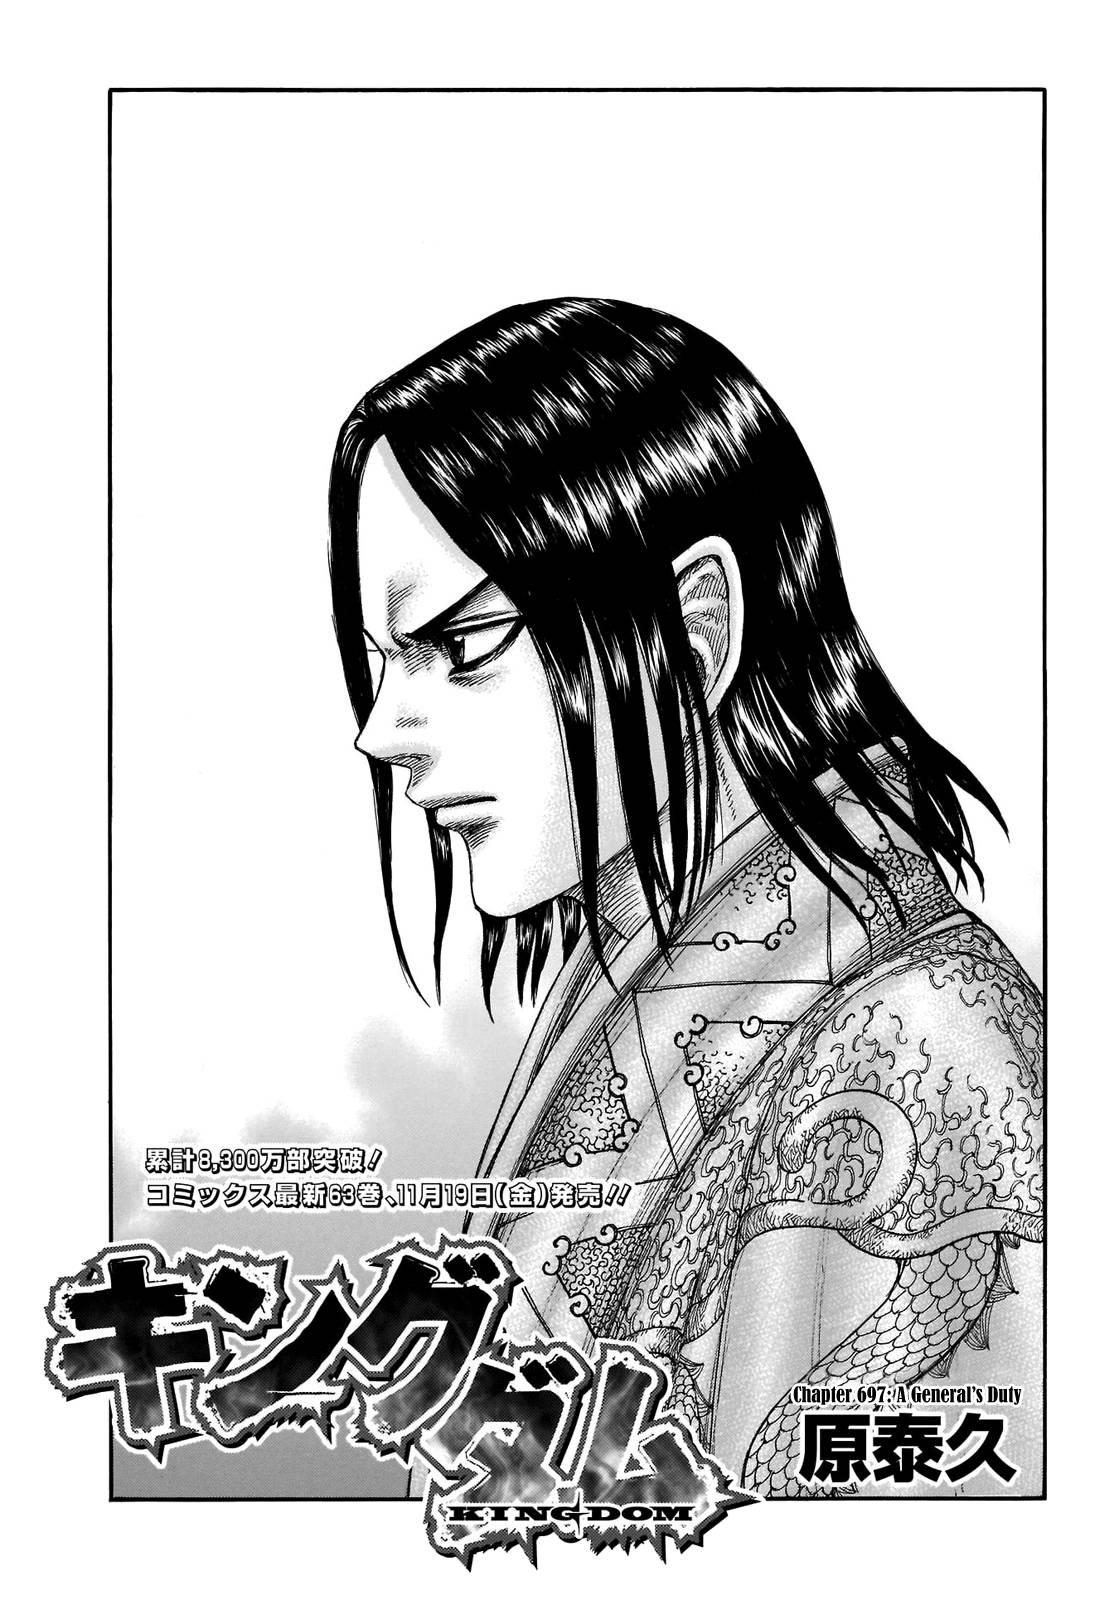 Kingdom chapter 697 page 3